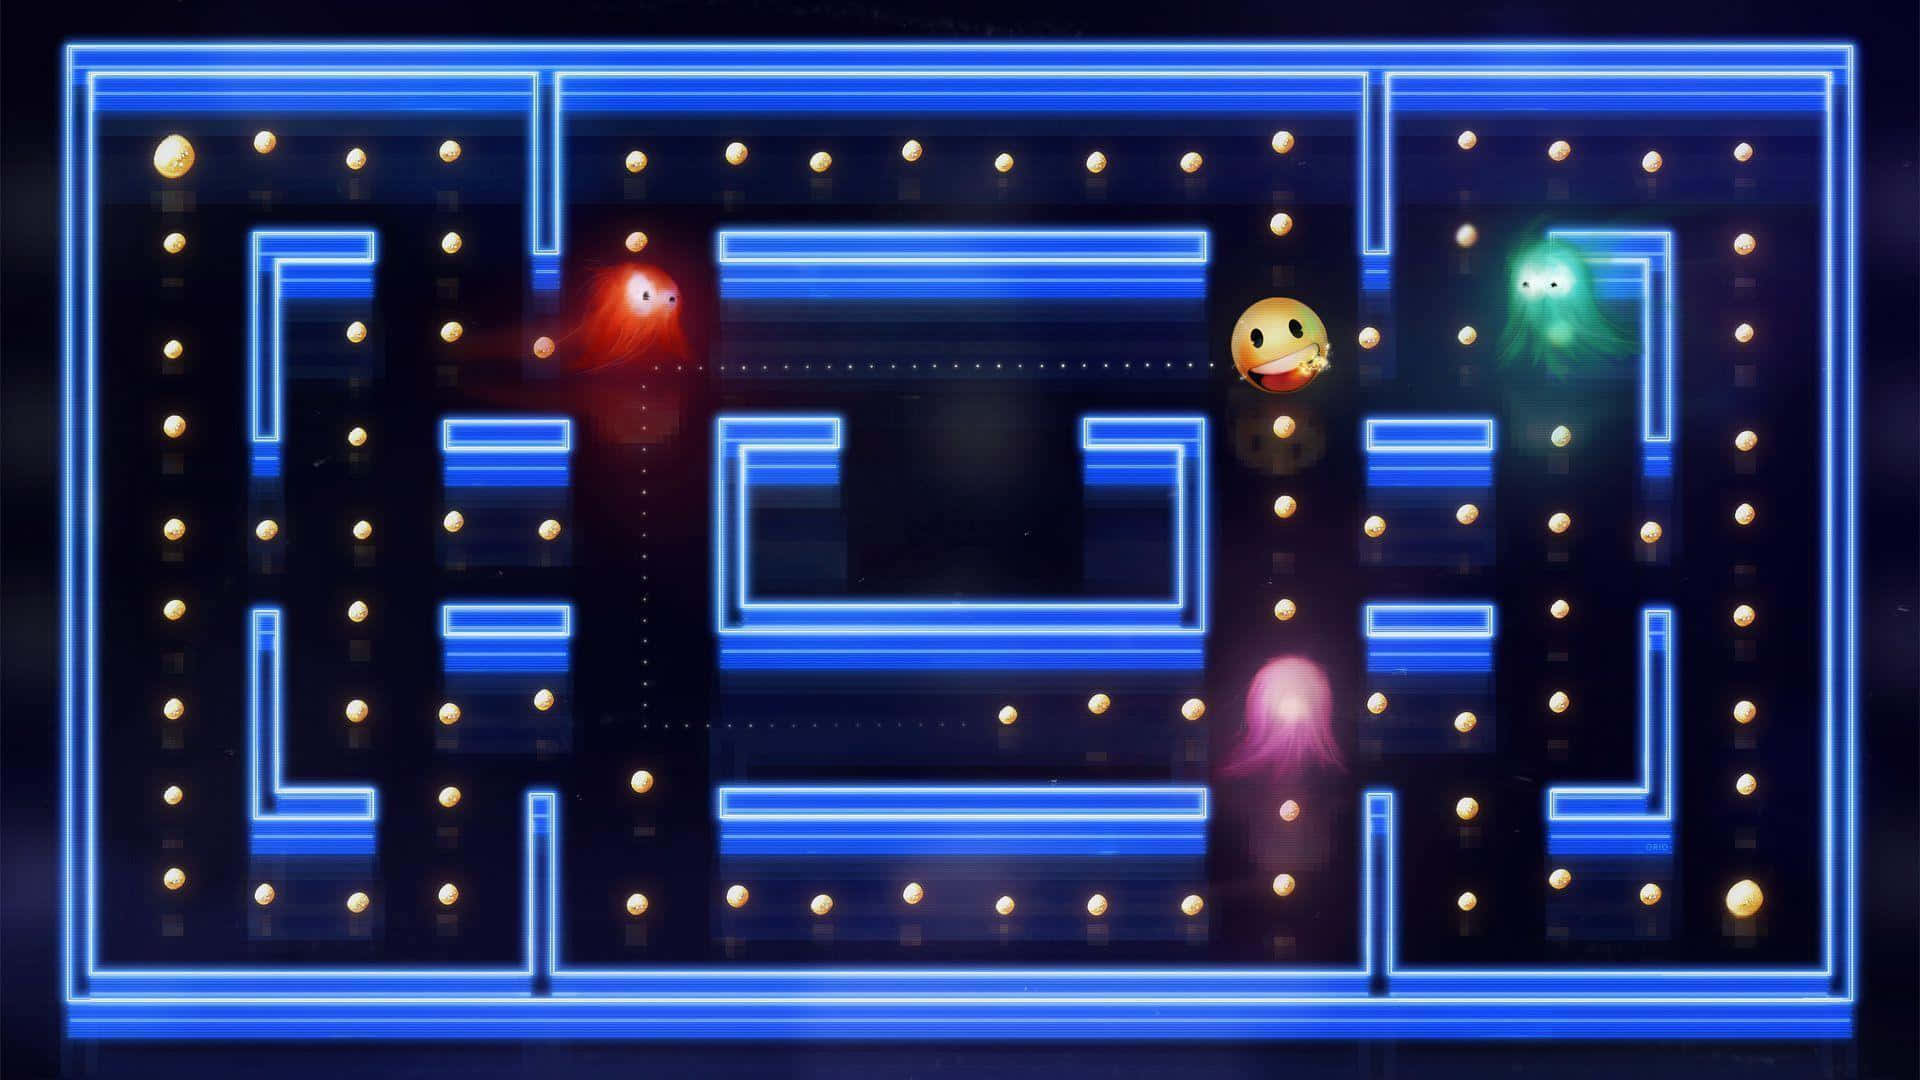 “Relive the nostalgia with HD Pacman!” Wallpaper